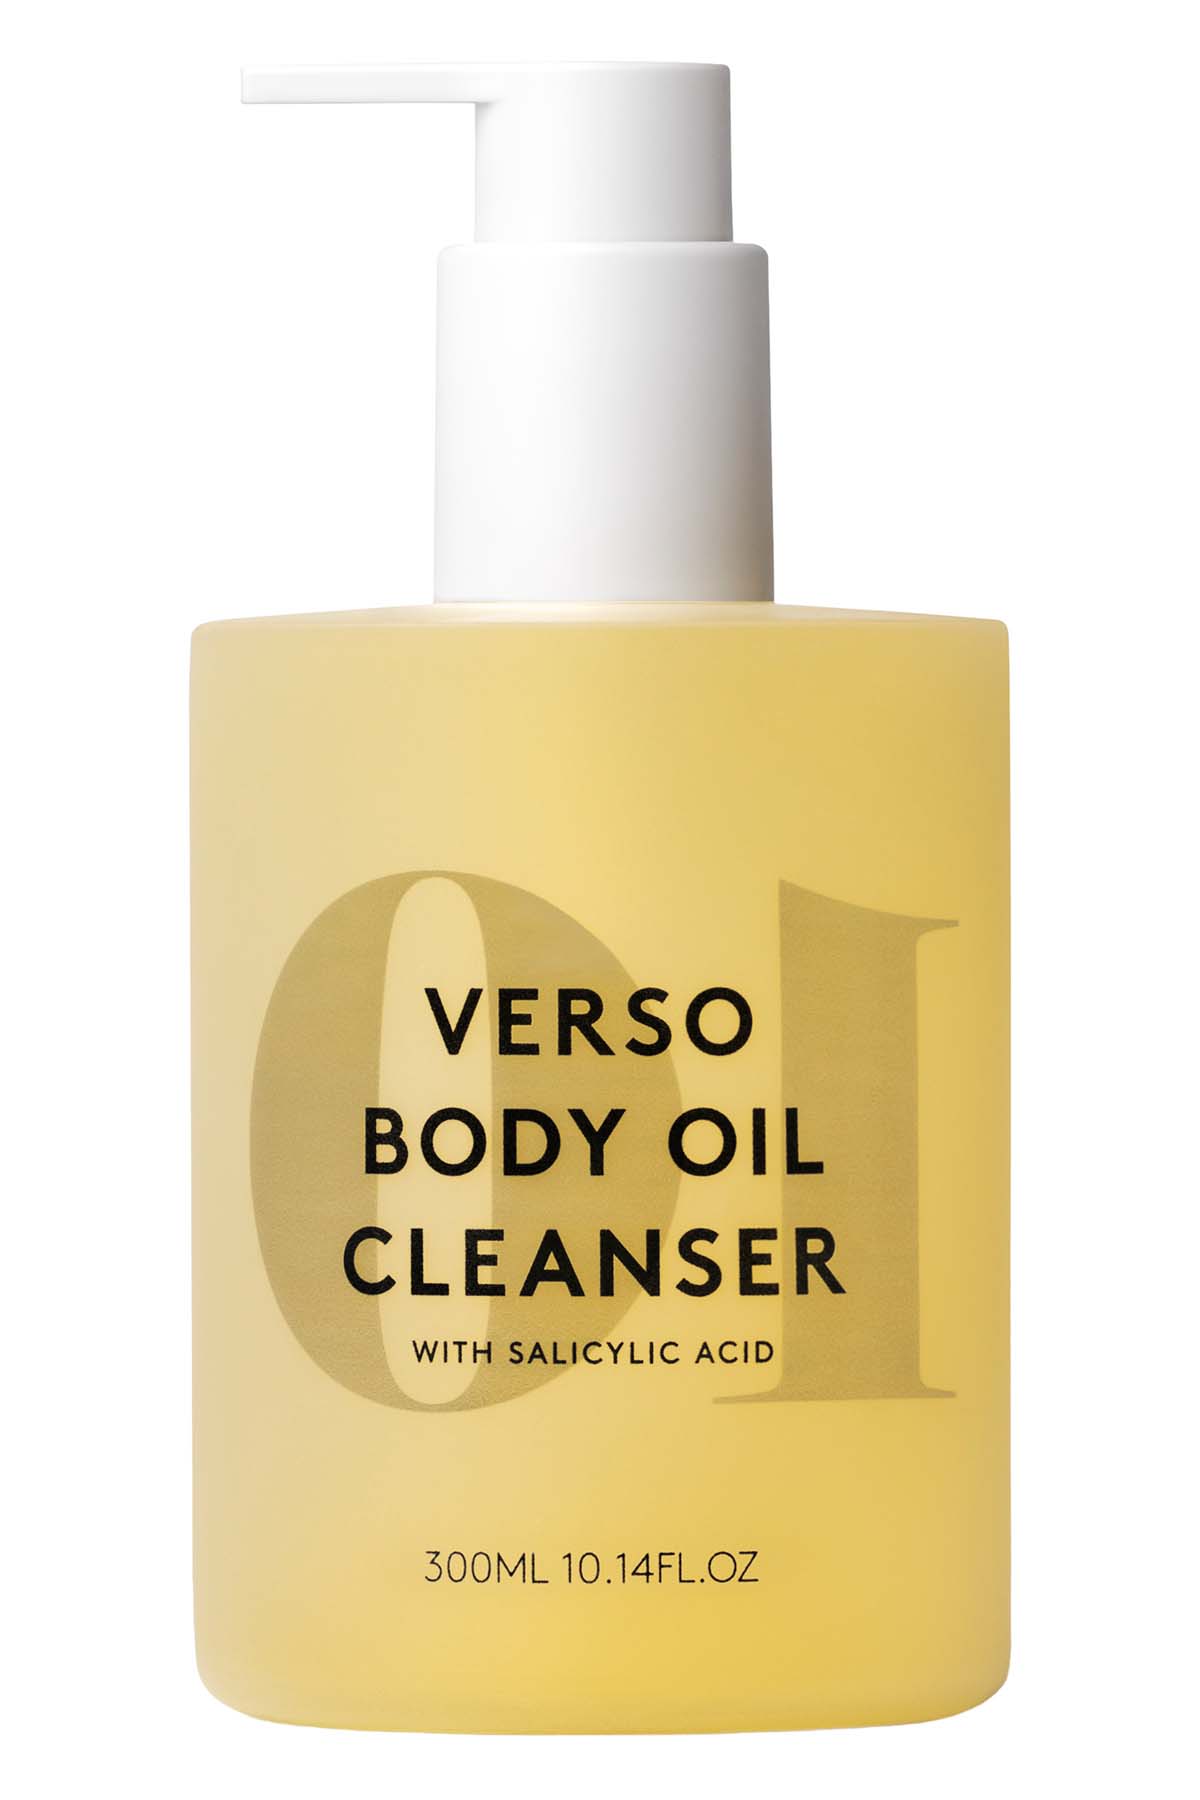 Verso Body Oil Cleanser with Salicylic Acid 300ML 